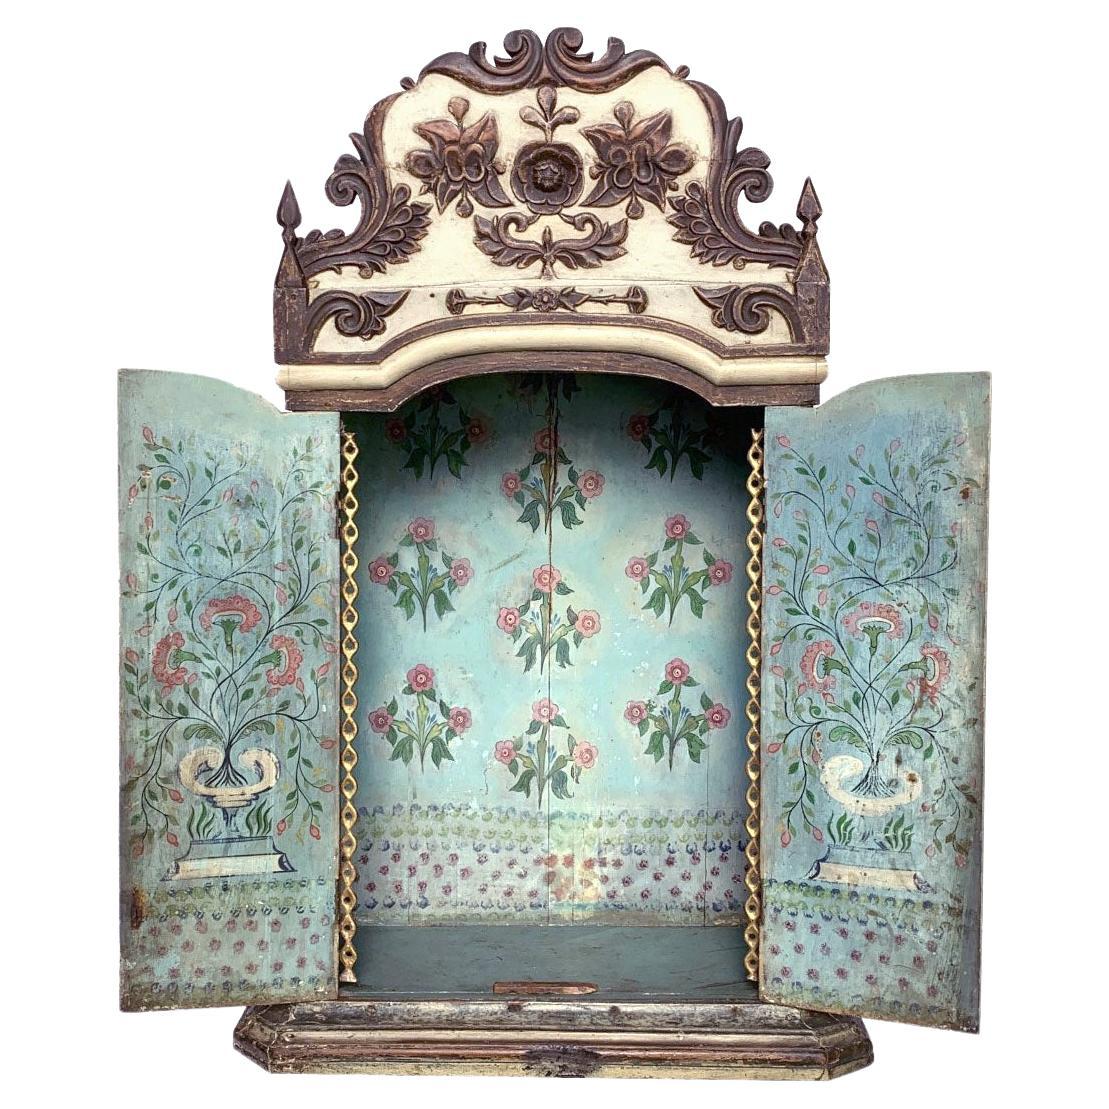 Gorgeous 18th Century Baroque South American Floral Shrine 